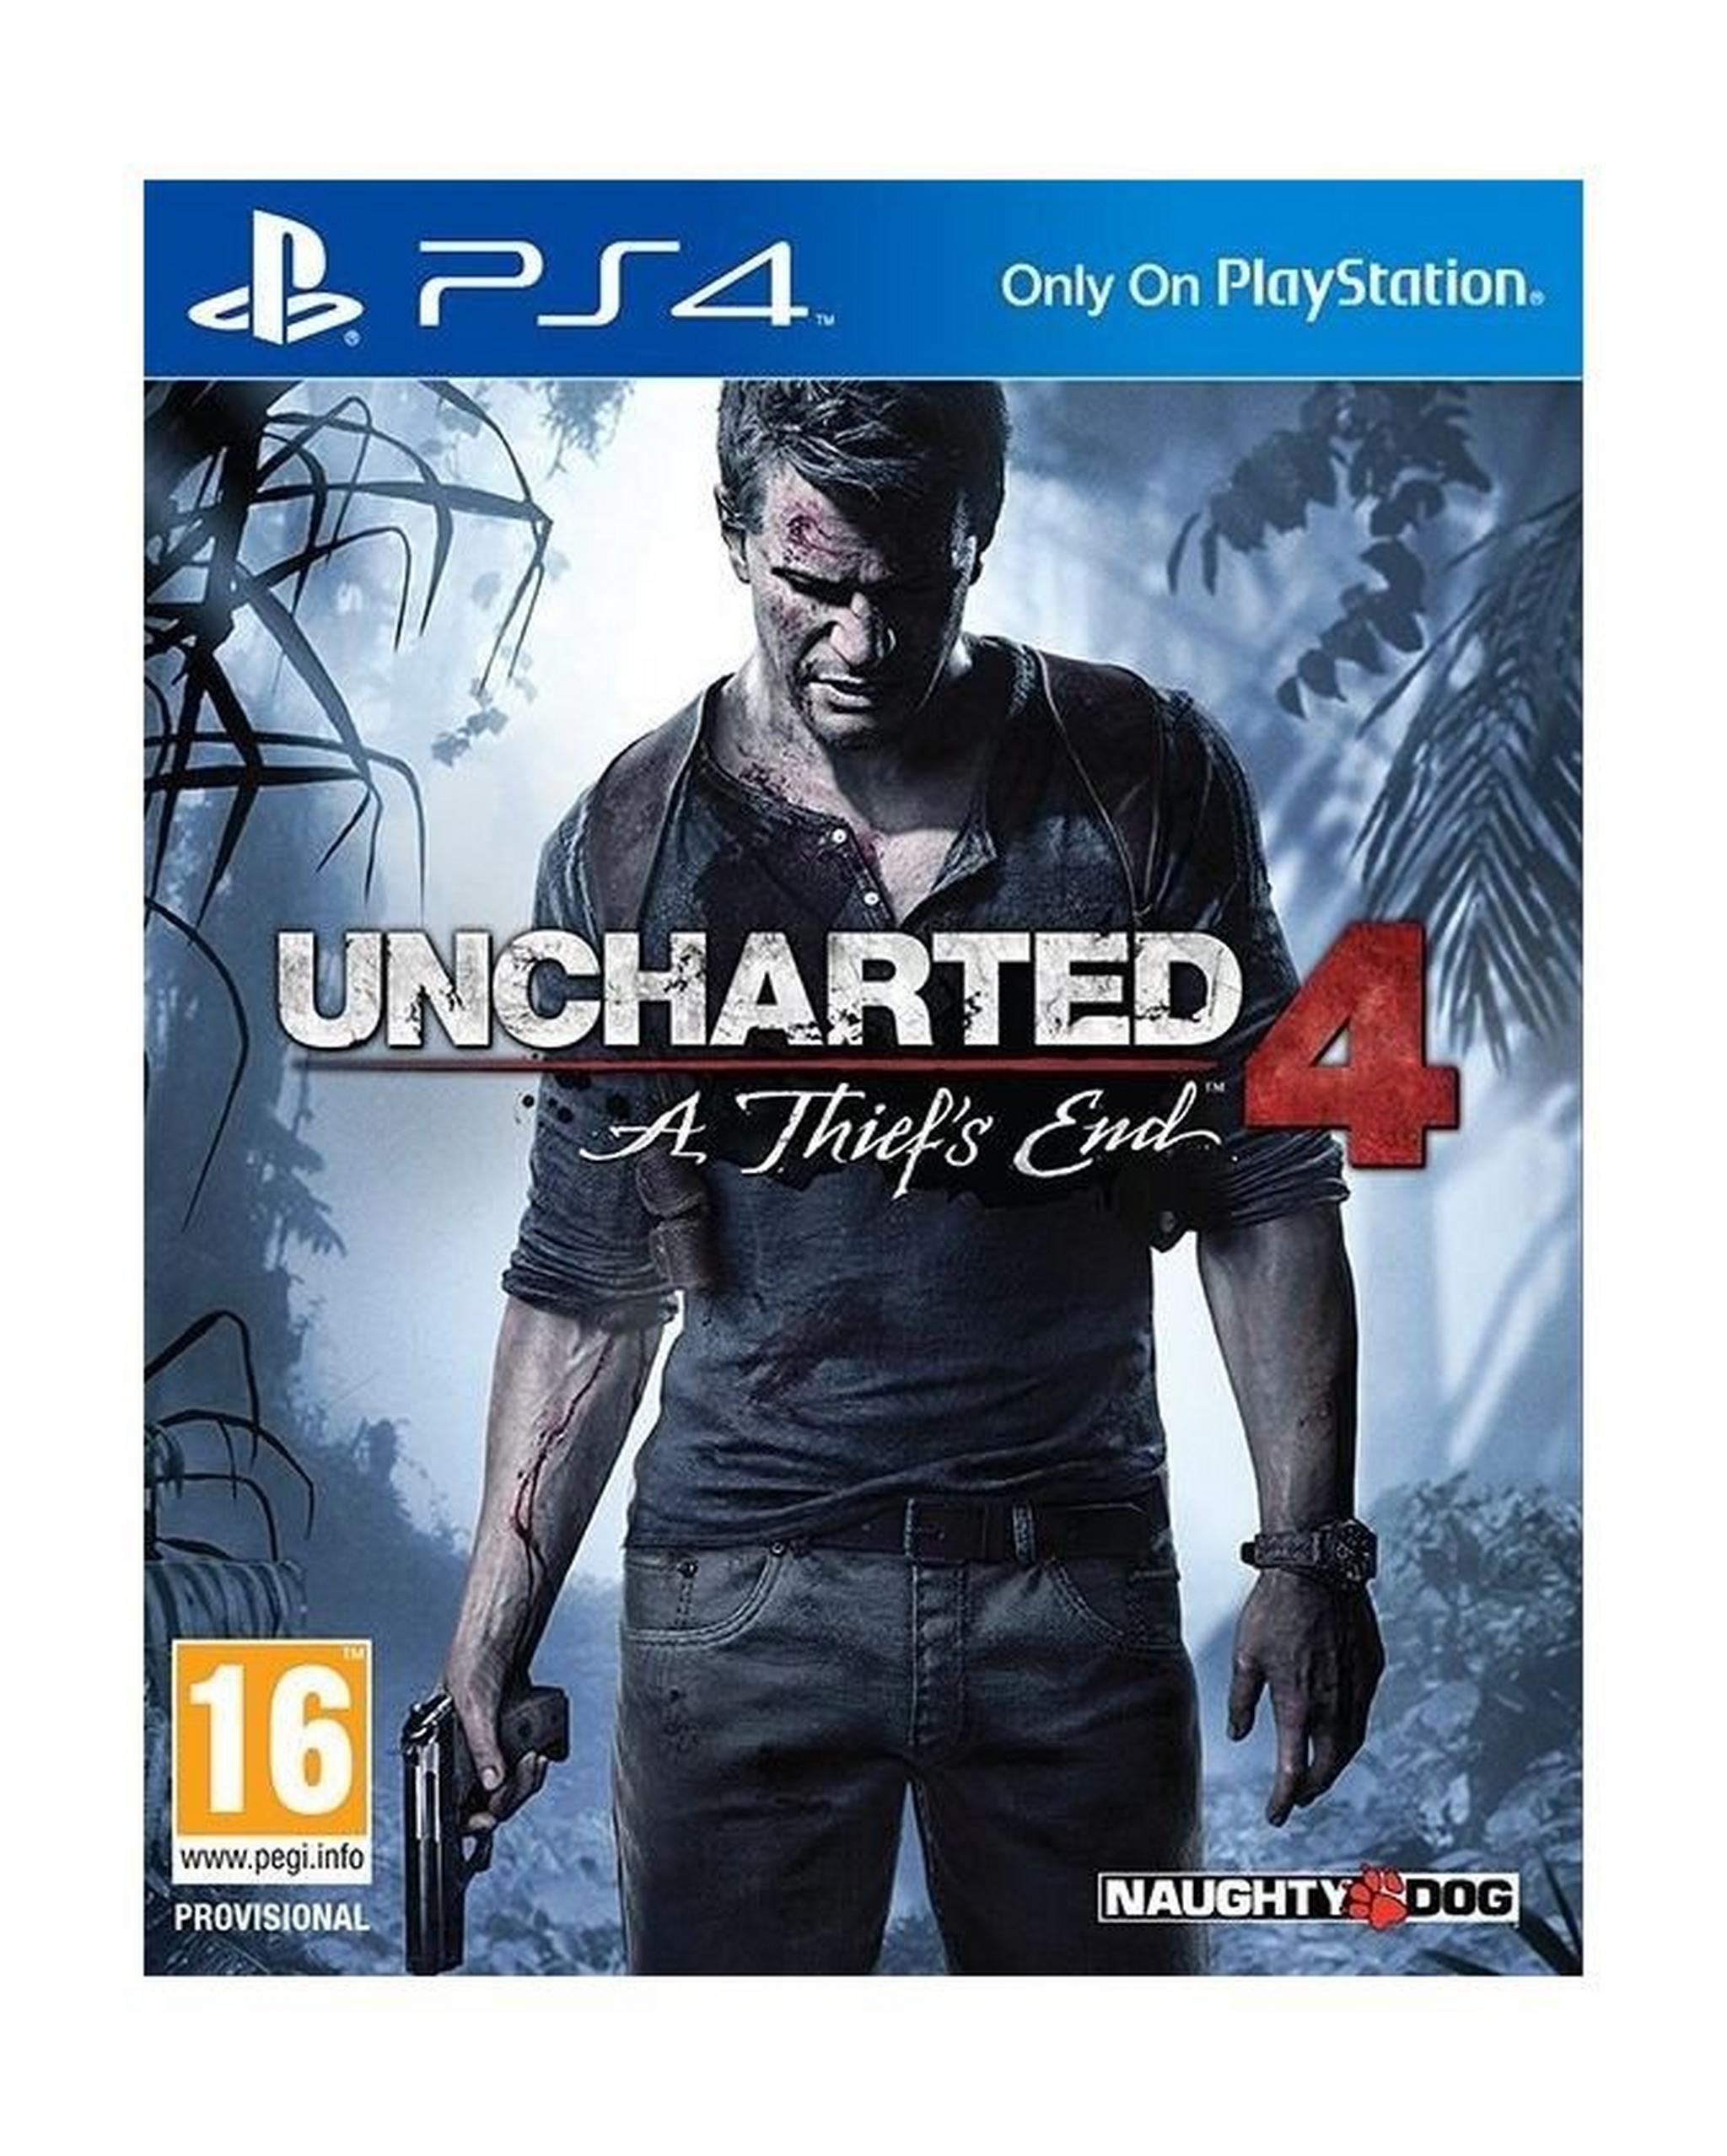 Uncharted 4: A Thief's End - Standard Edition - PlayStation 4 Game